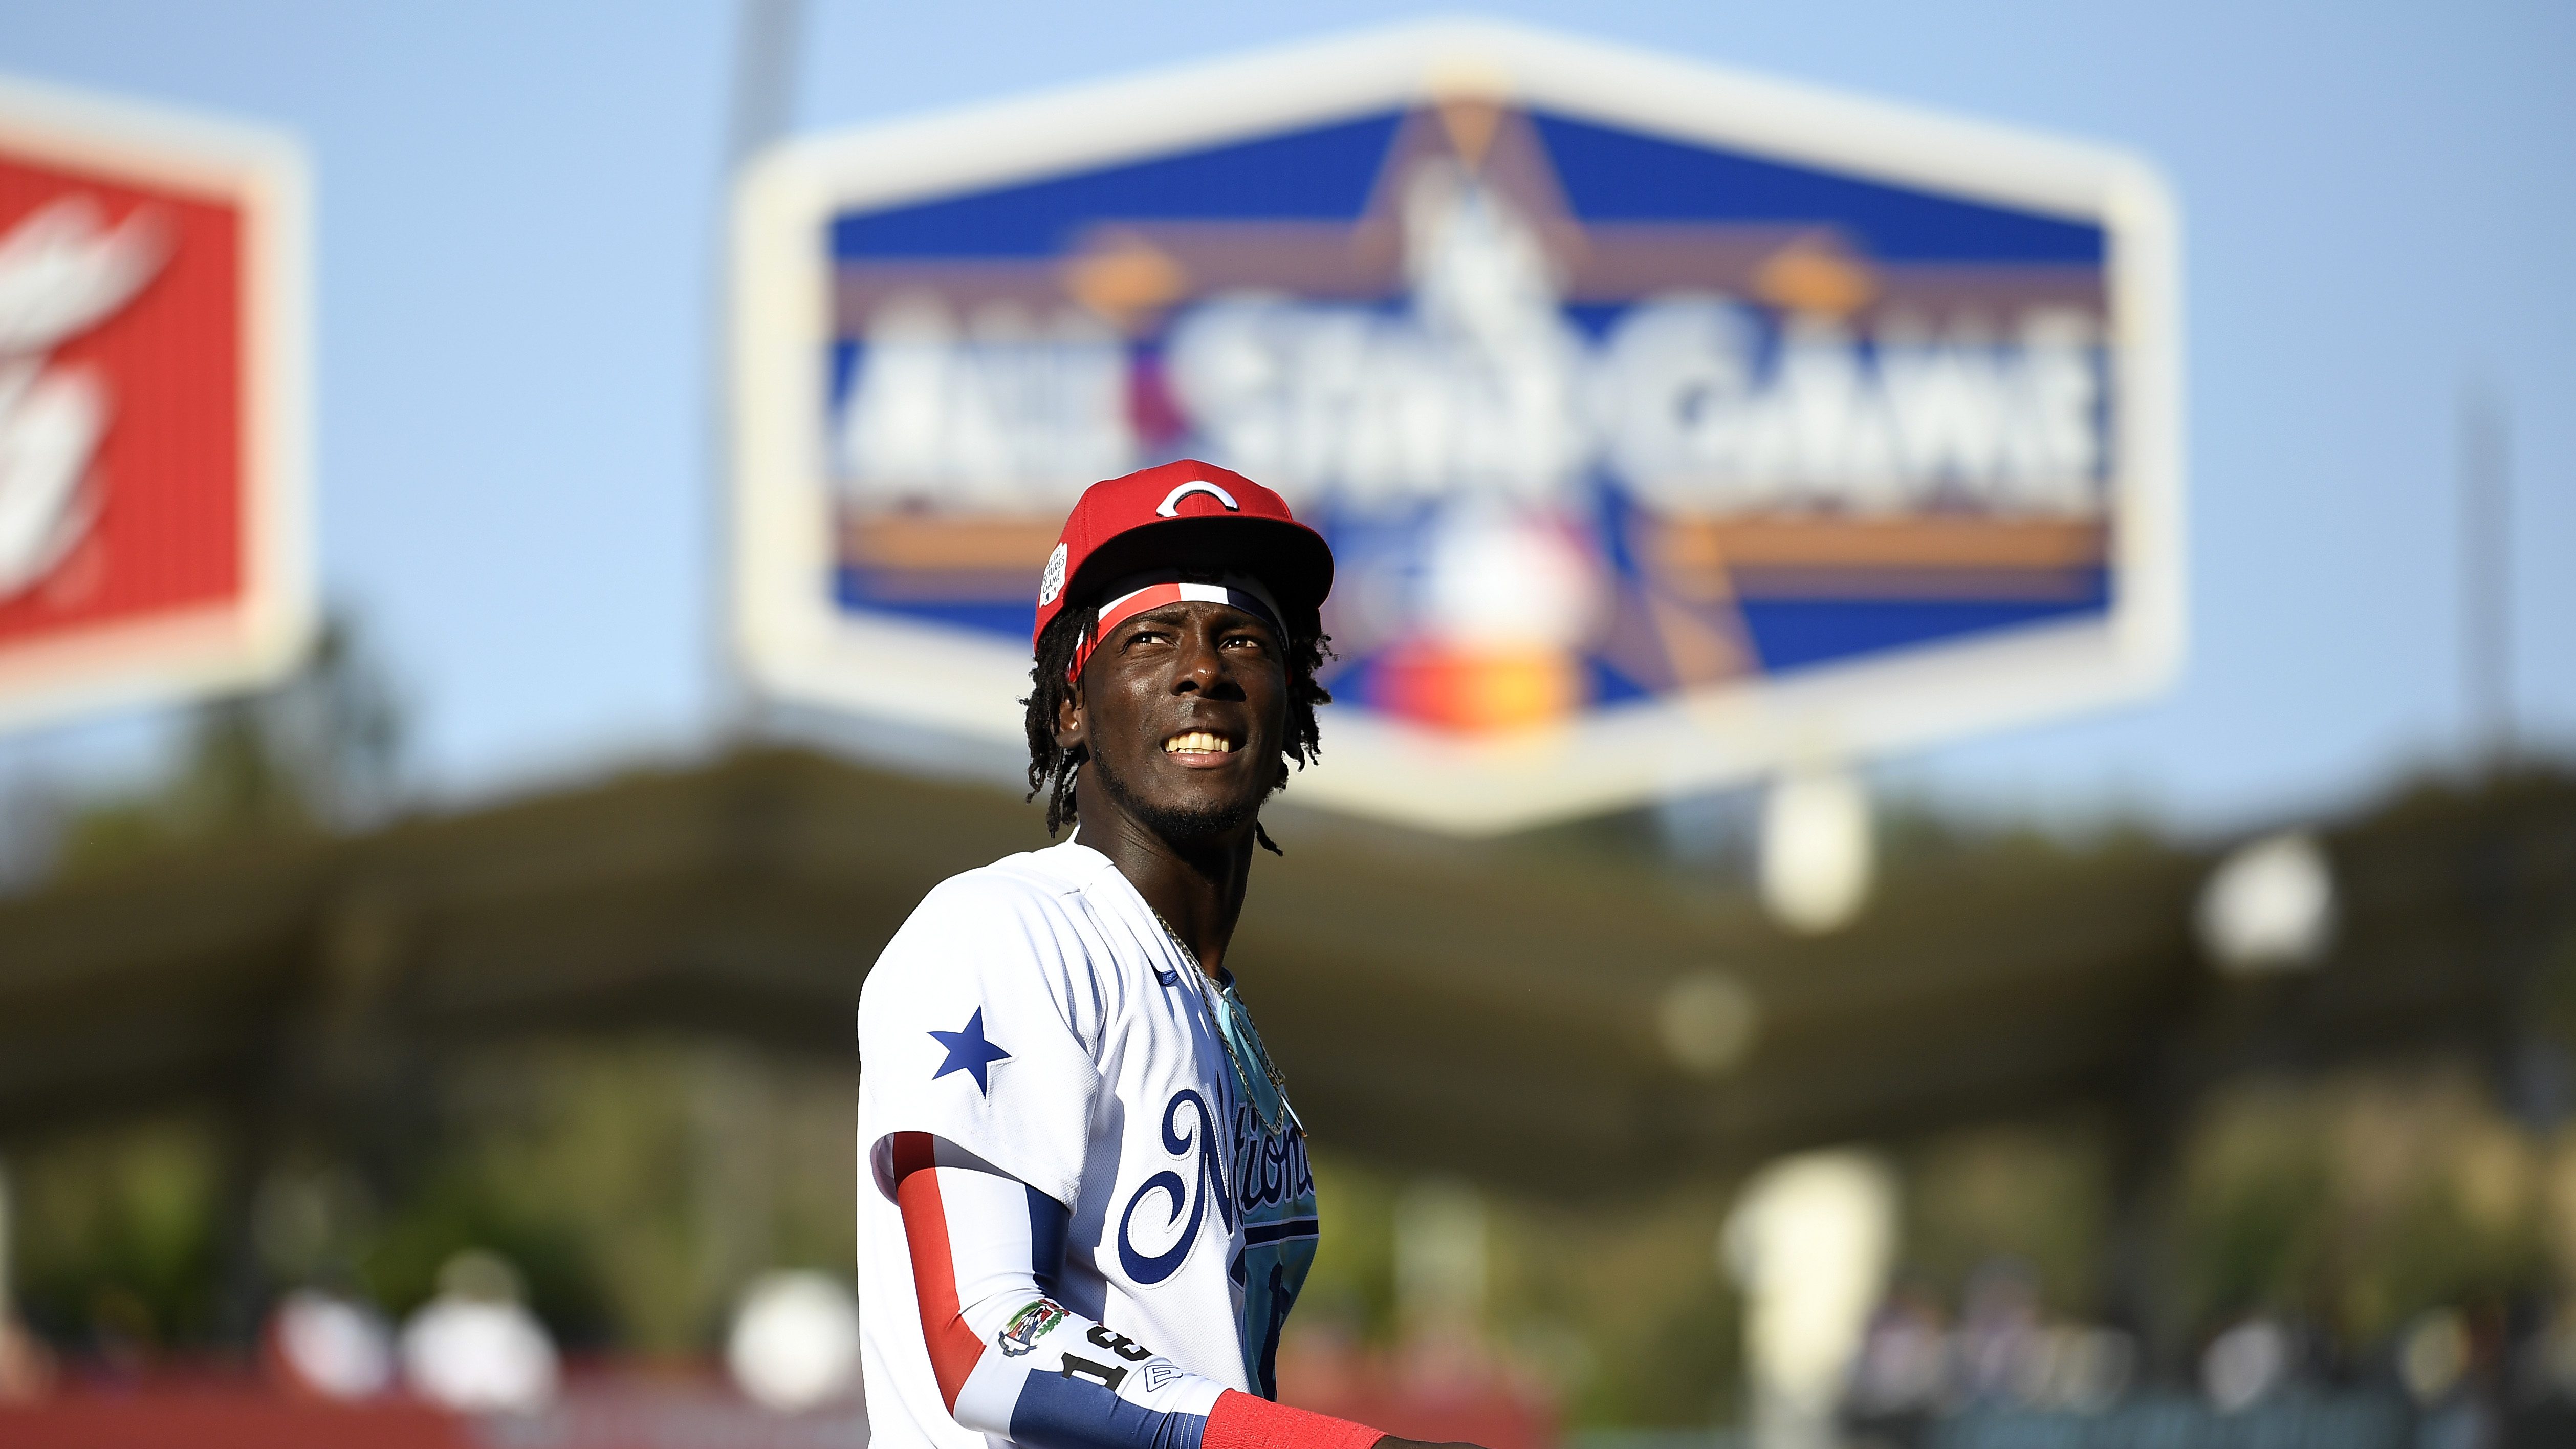 MLB All-Star Game 2022: Sights, sounds from Day 1 at Futures Game